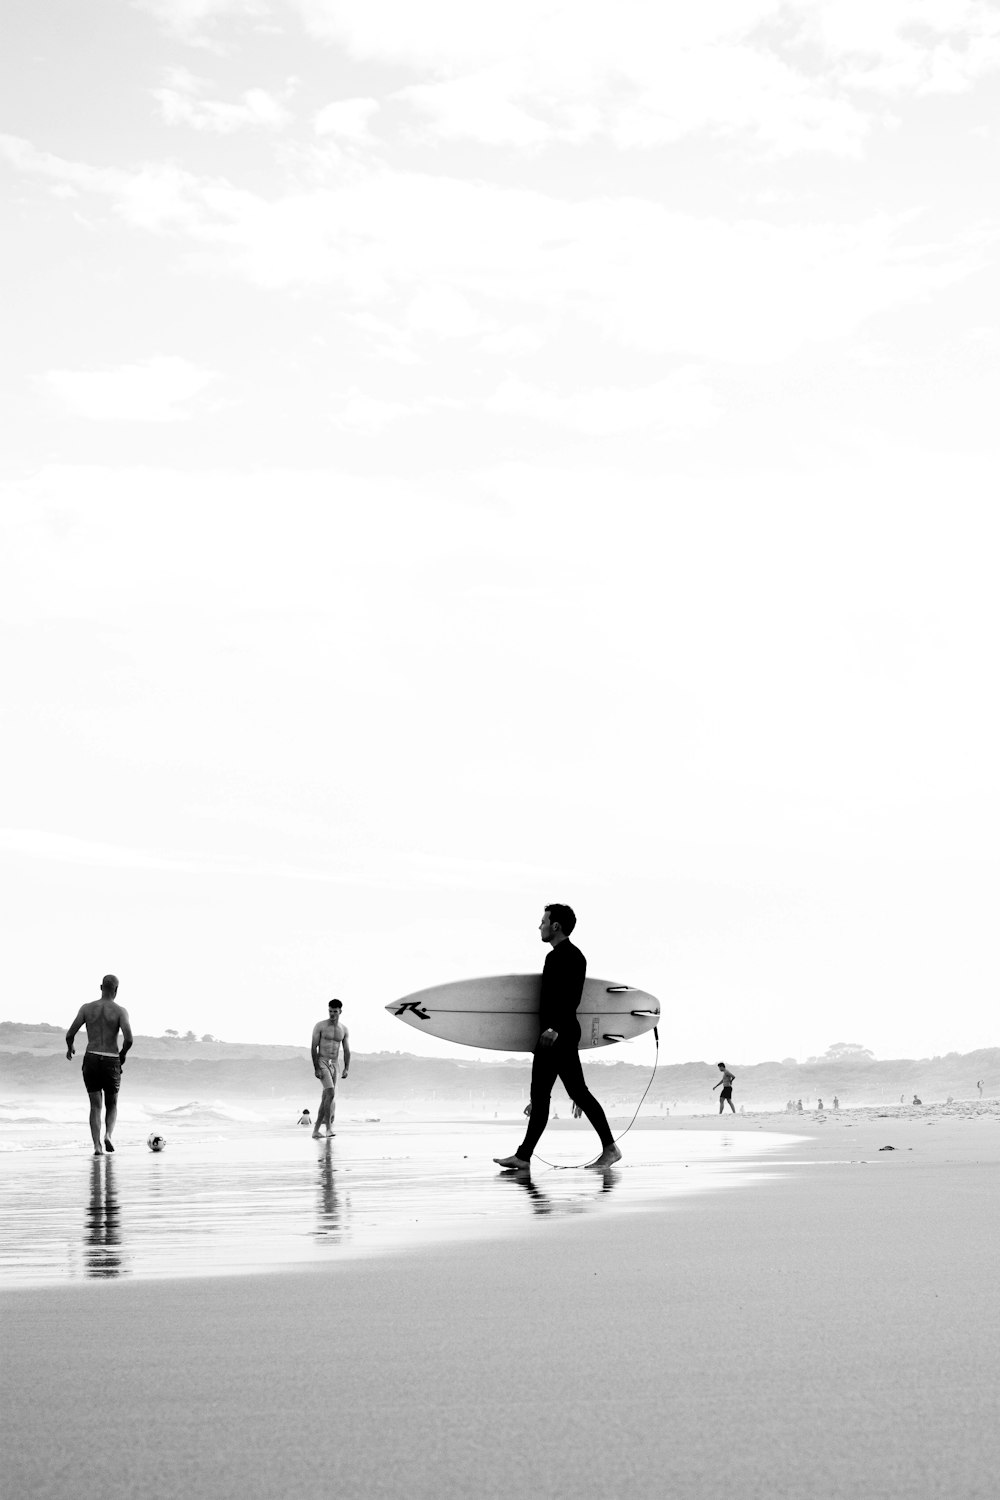 grayscale photo of man and woman holding surfboard walking on beach